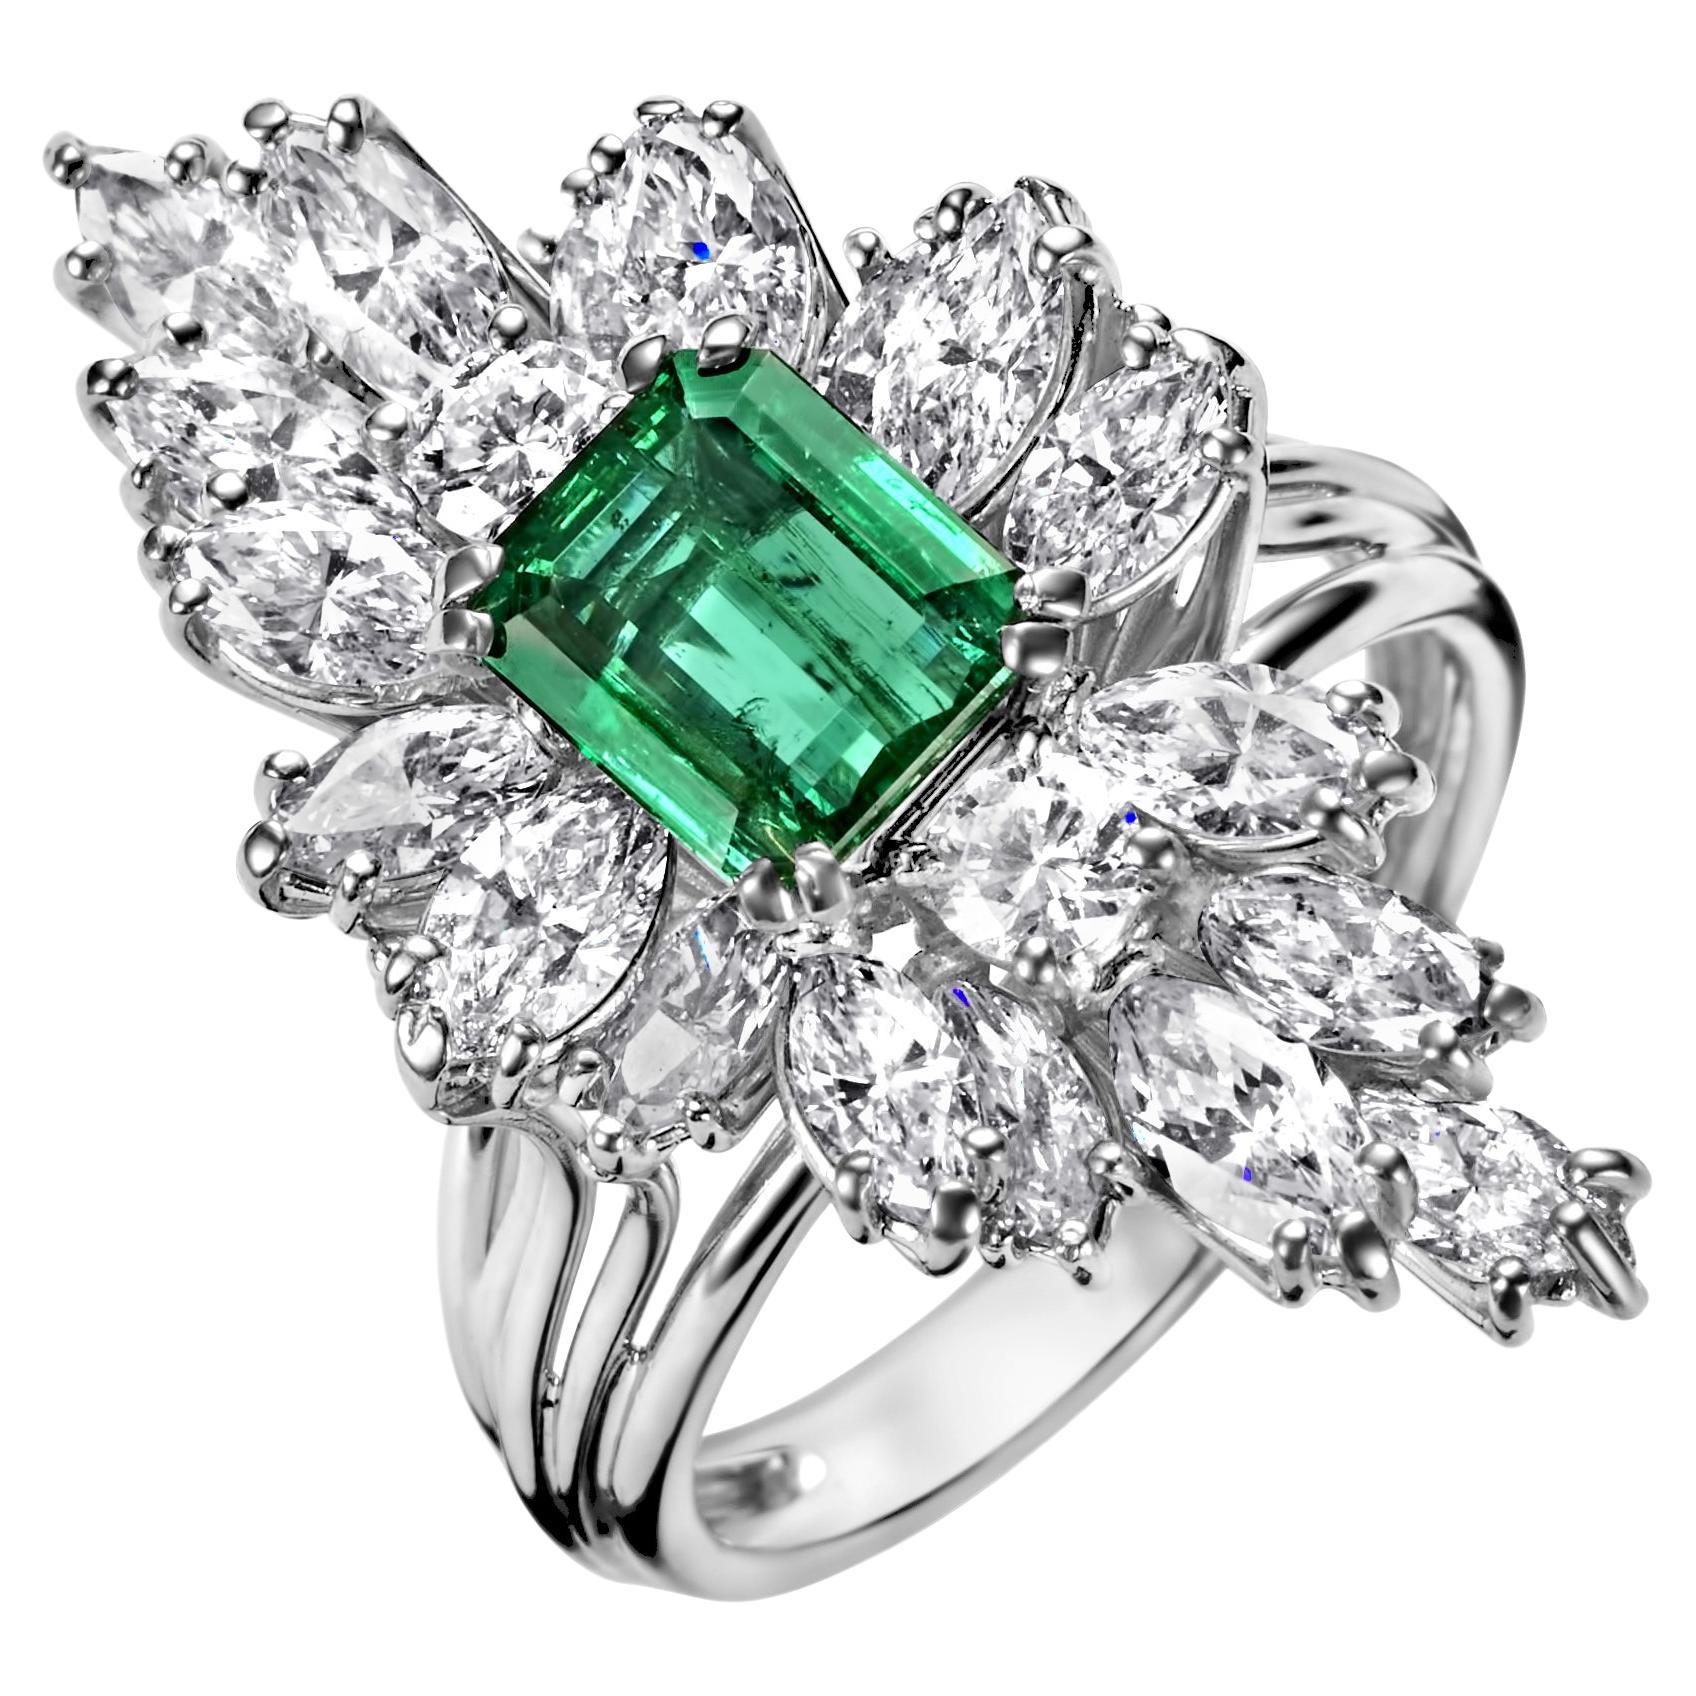 18kt White Gold Ring with 1.49 Ct Emerald Stone Surrounded by Diamonds